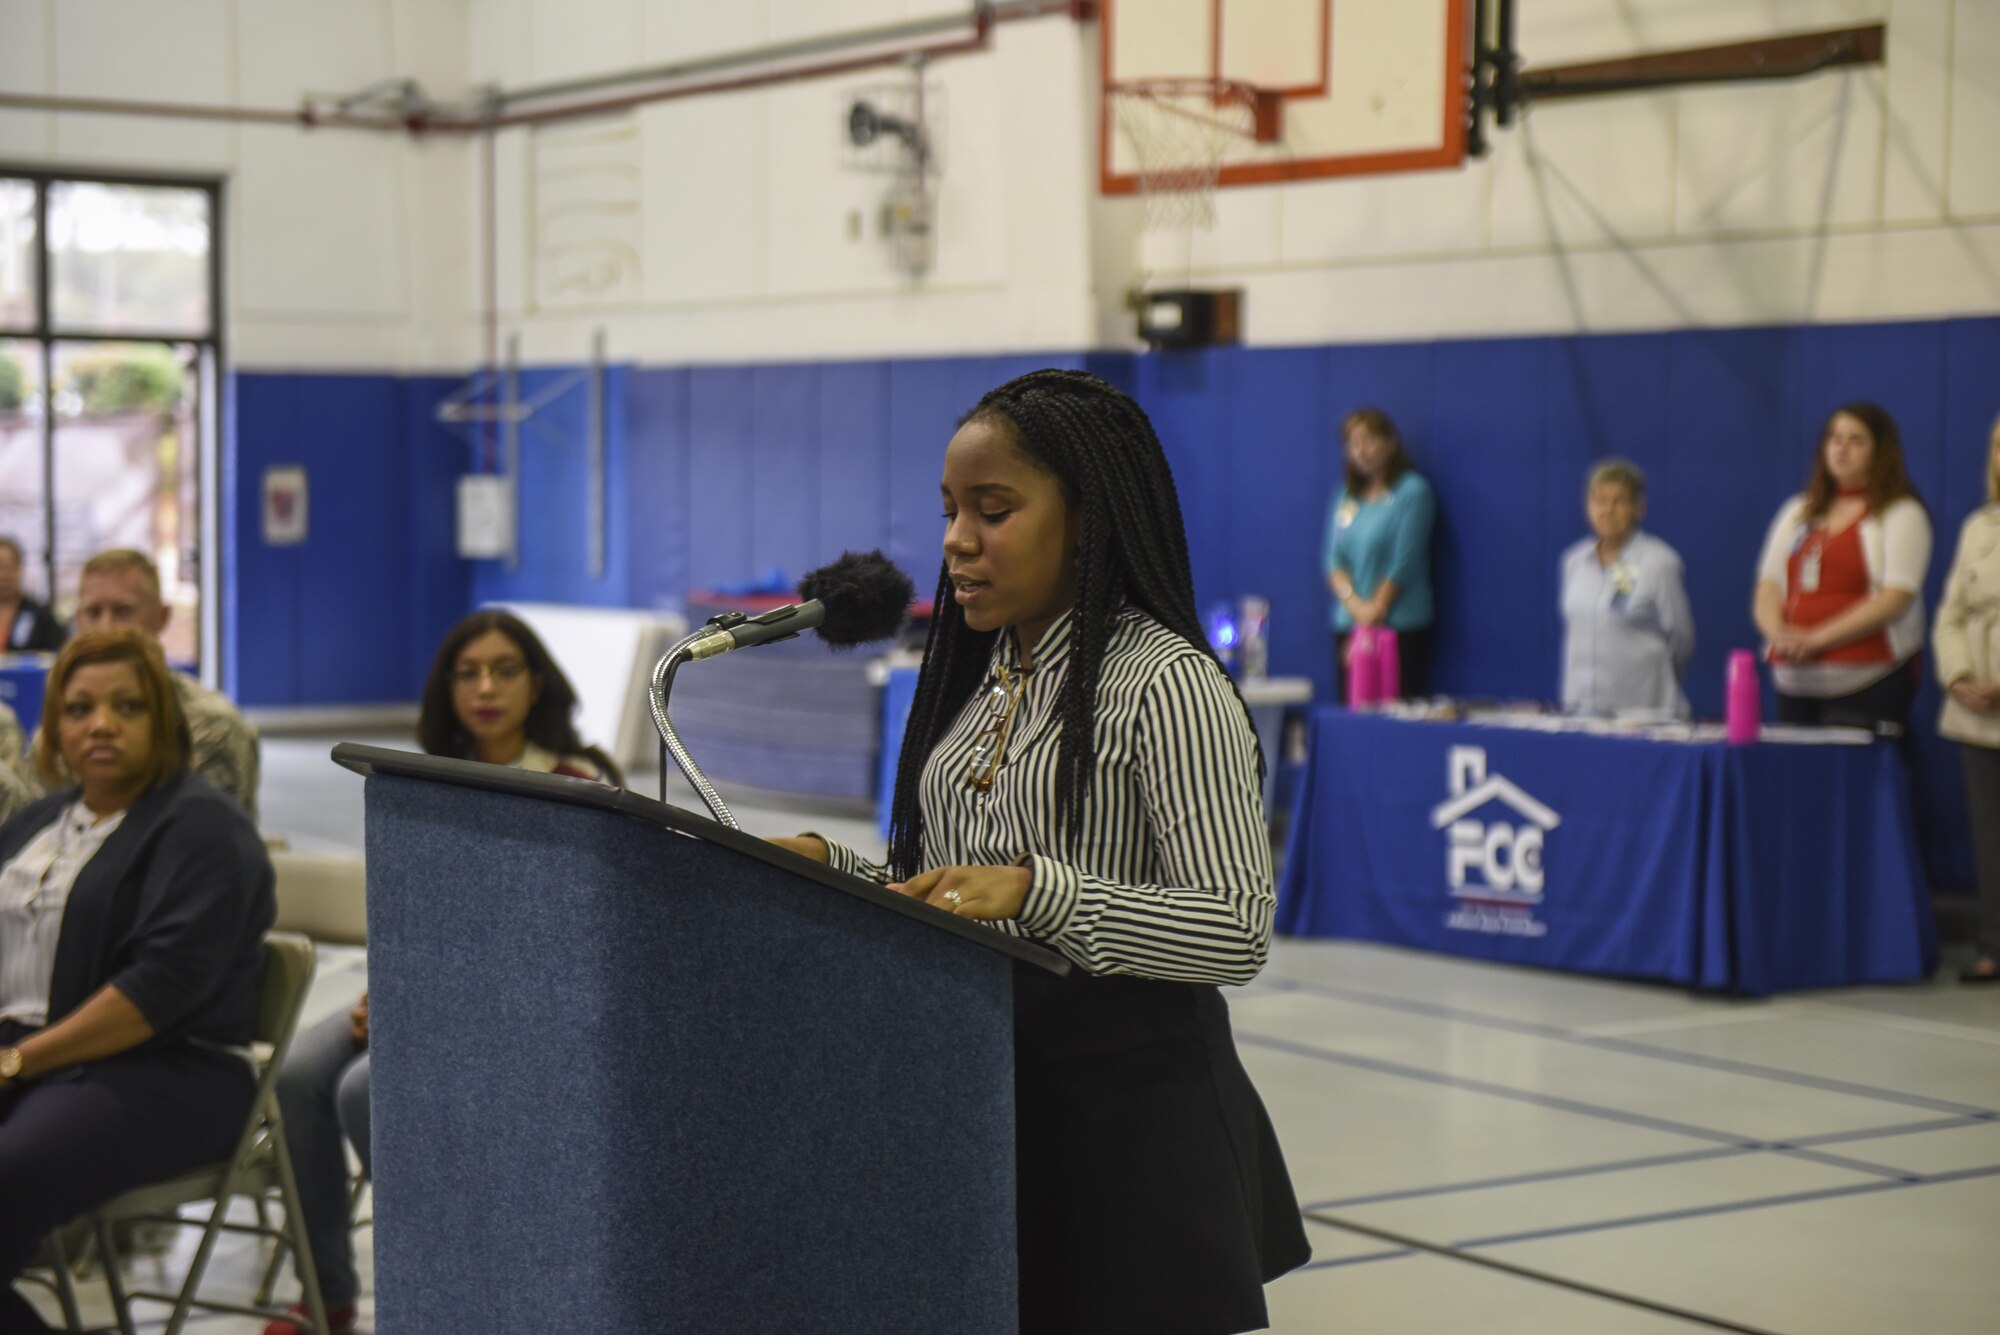 Amaya Edwards, the Youth Center’s Youth of the Year, reads the Month of the Military Child and Child Abuse Prevention Month proclamations during a ceremony at the Youth Center, Hurlburt Field, Fla., April 3, 2017. Child Abuse Prevention Month is an annual observance in the U.S. dedicated to raising awareness and preventing child abuse. April has been designated Child Abuse Prevention Month in the United States since 1983. (U.S. Air Force photo by Senior Airman Jeff Parkinson)